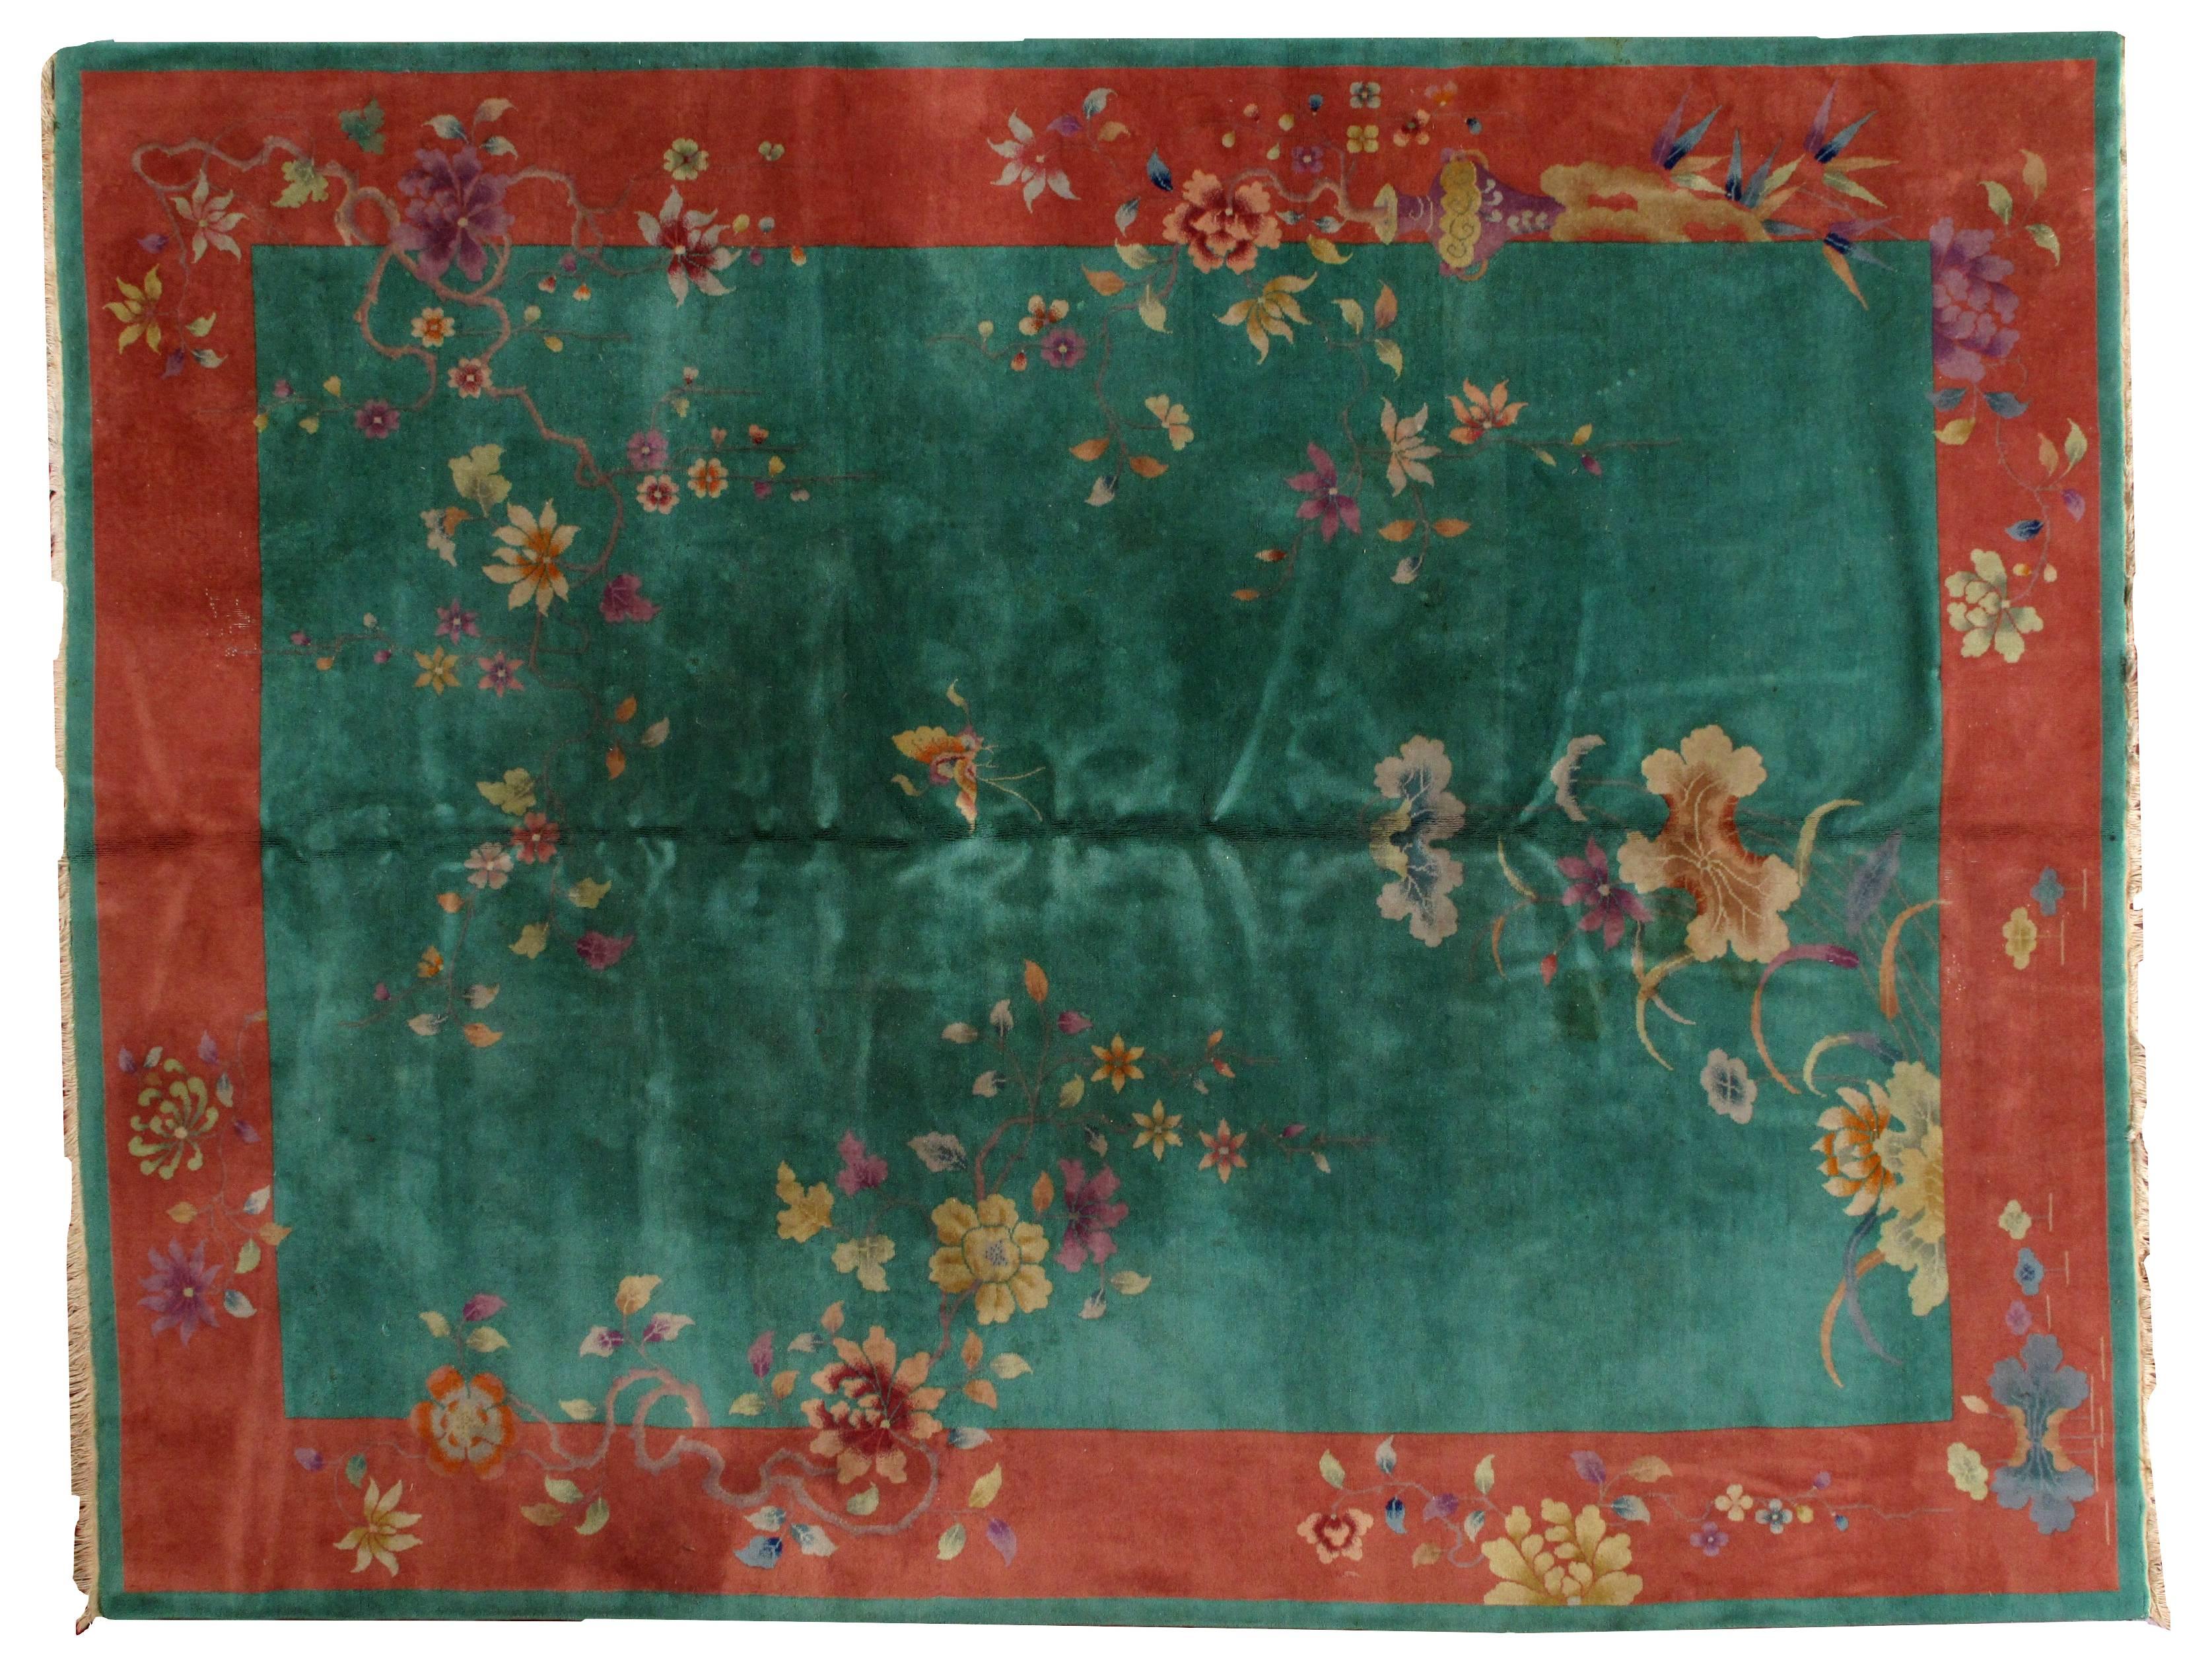 Antique Art Deco Chinese rug in original condition. The rug has beautiful deep green color of the field and orange border. Some classic floral design with the large flowers and vase decorating the rug. The rug is in original good condition.
 